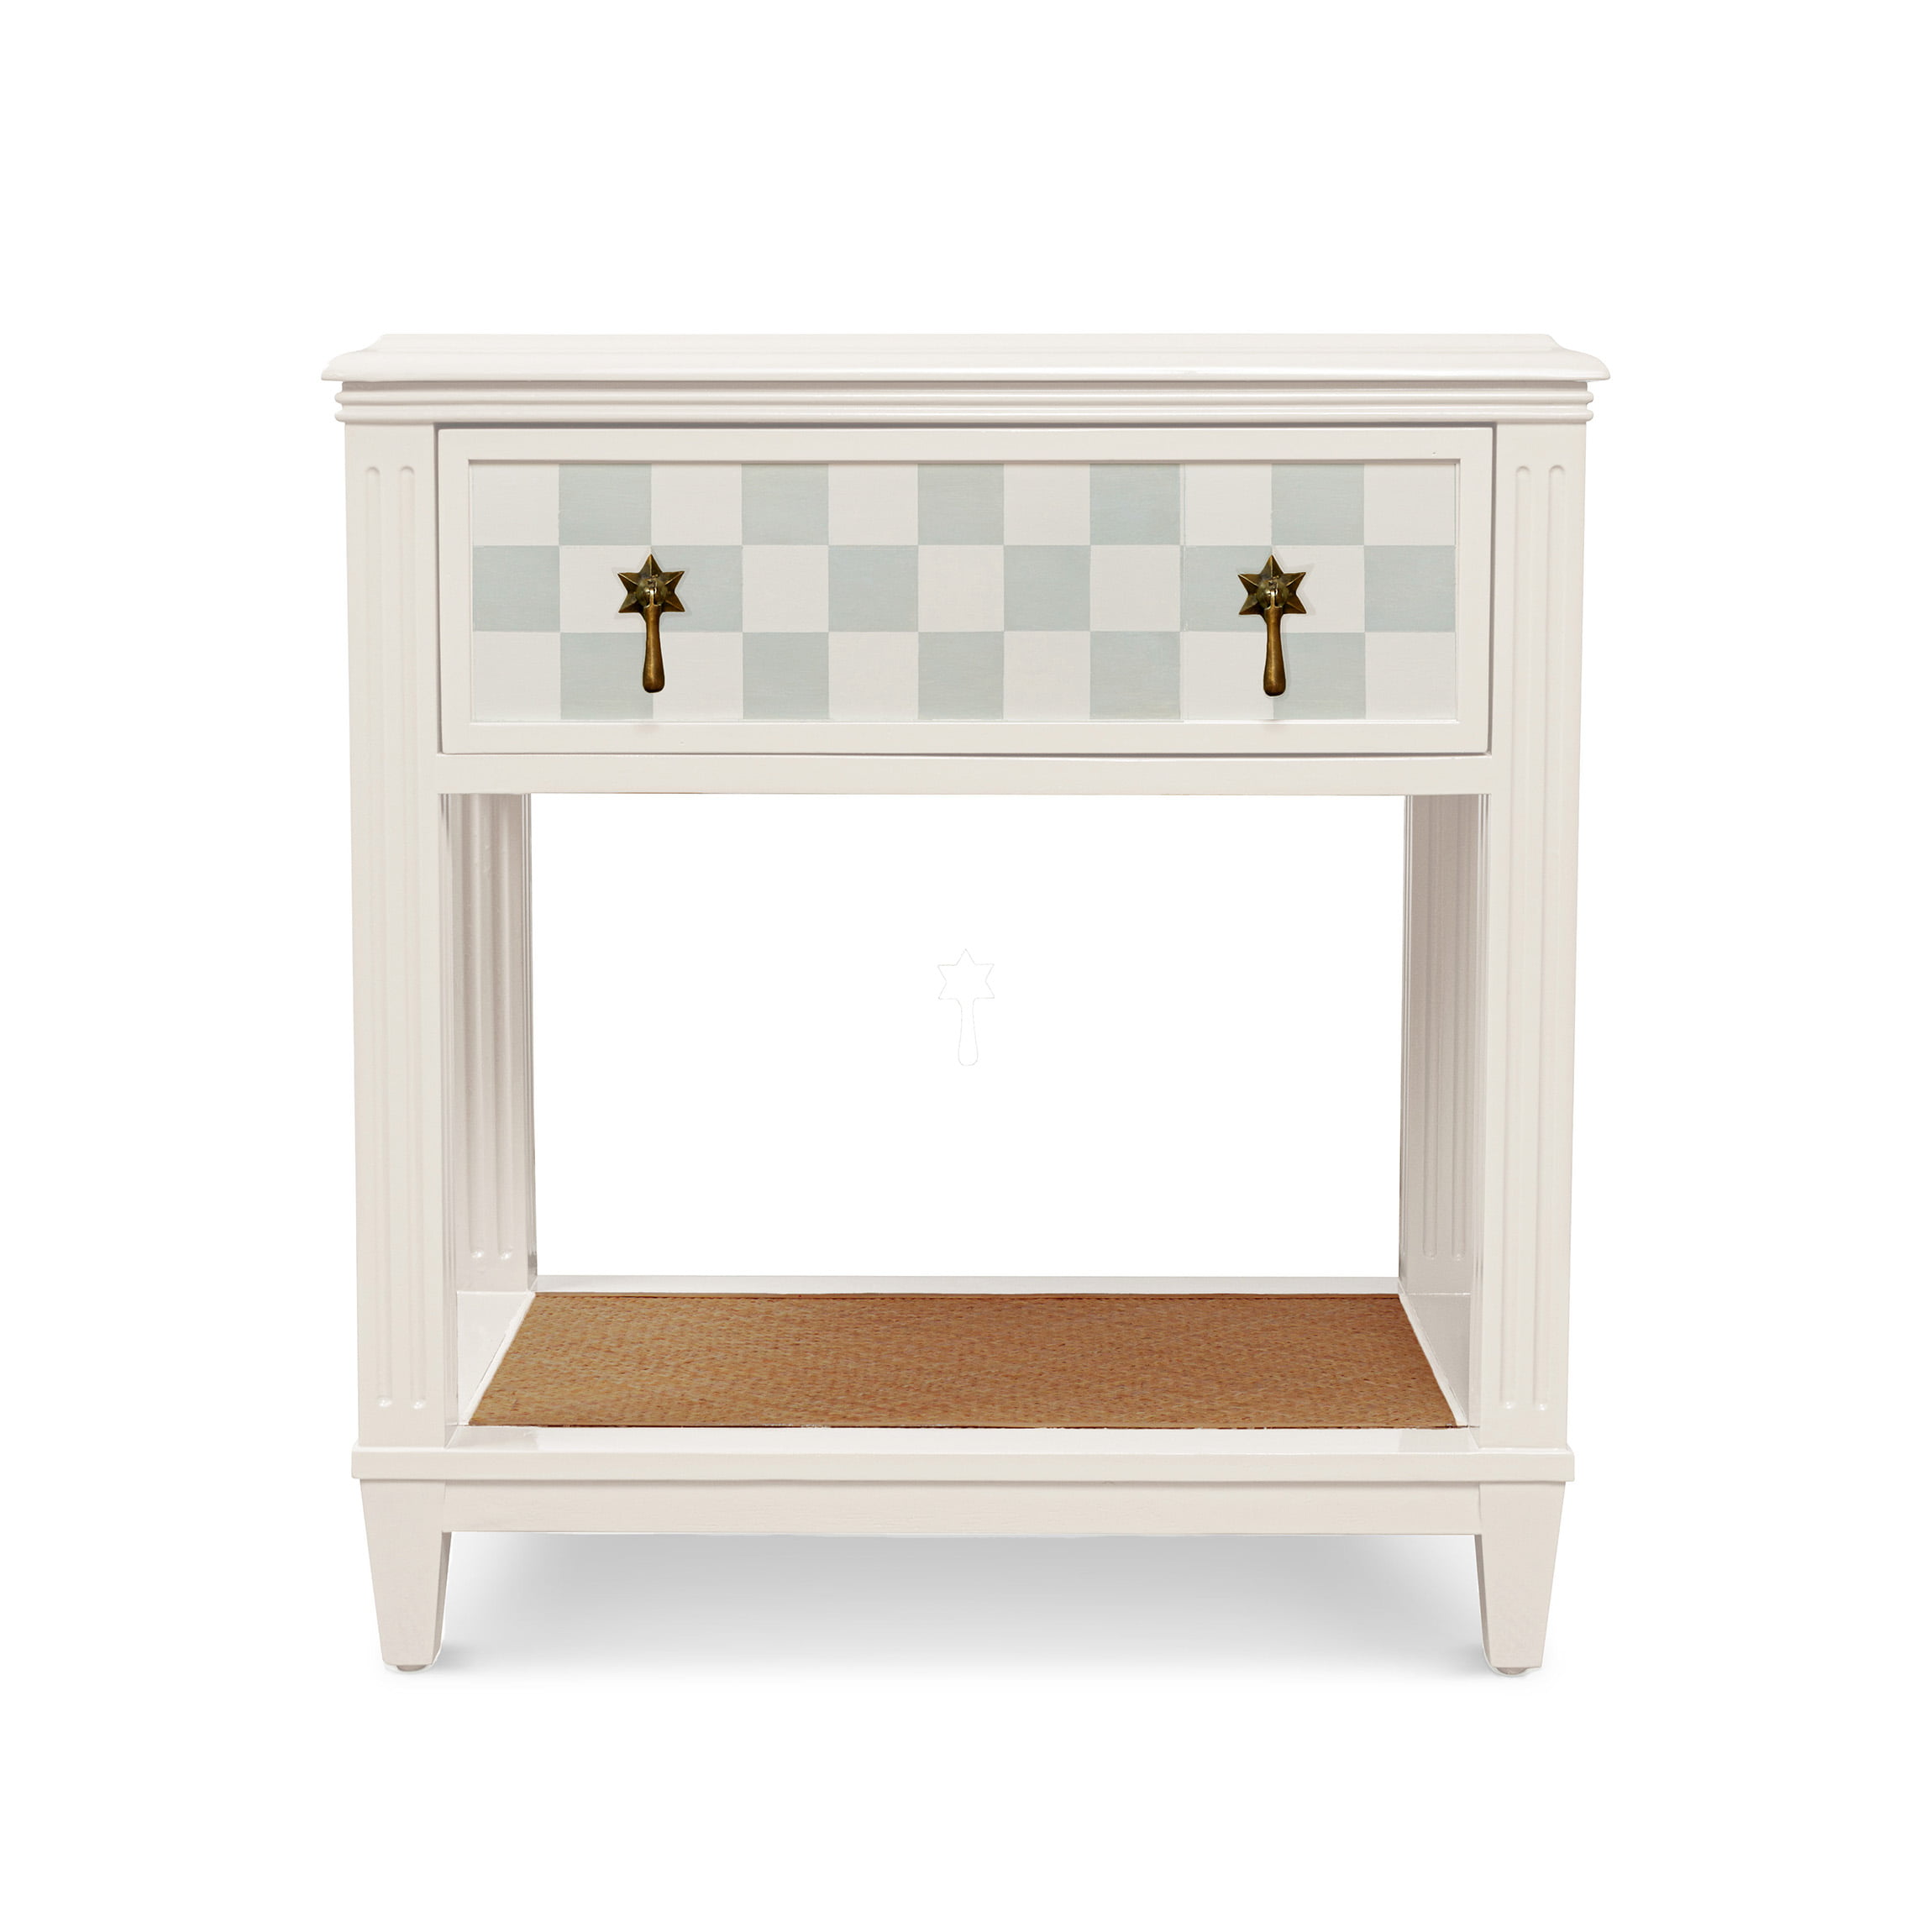 A faded-white bedside table with a bespoke checkerboard painted design and lower shelf.